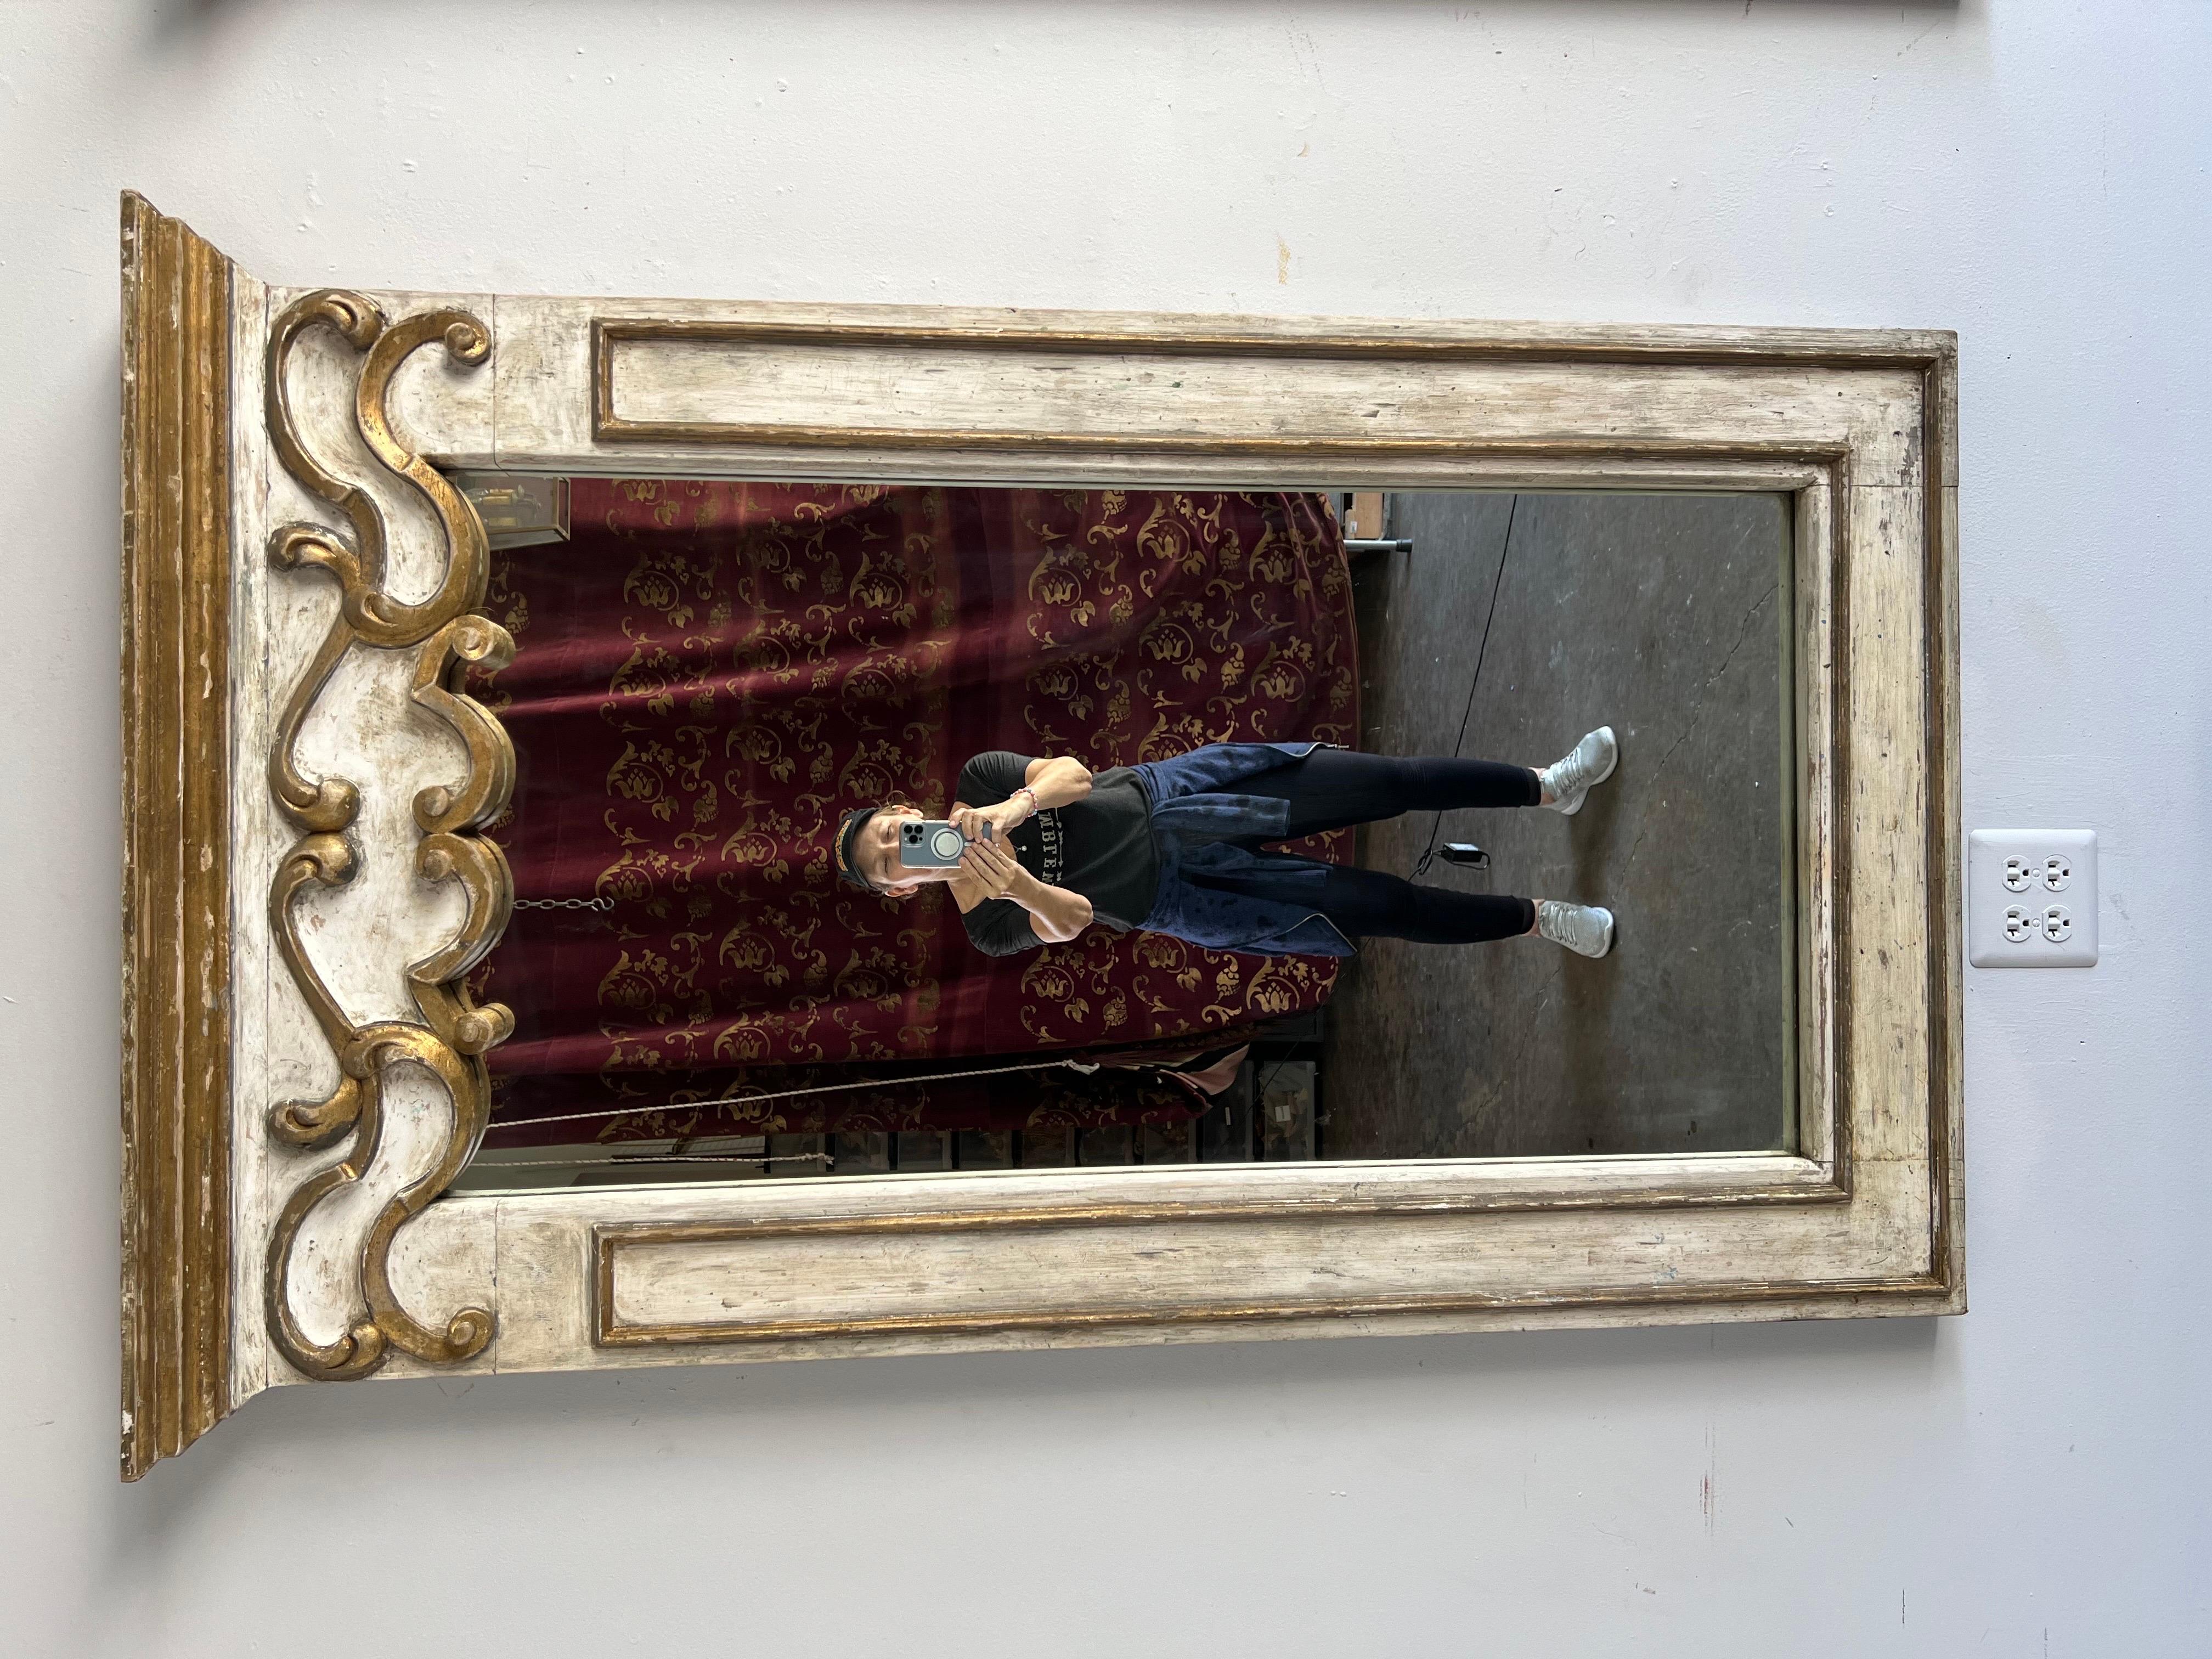 Pair of custom Italian style painted & parcel gilt mirrors originally made by 
Timothy Corrigan. The mirror are painted antique white and have gold leaf on the raised portions of the mirrors. There is missing paint and gold leaf throughout. the pair